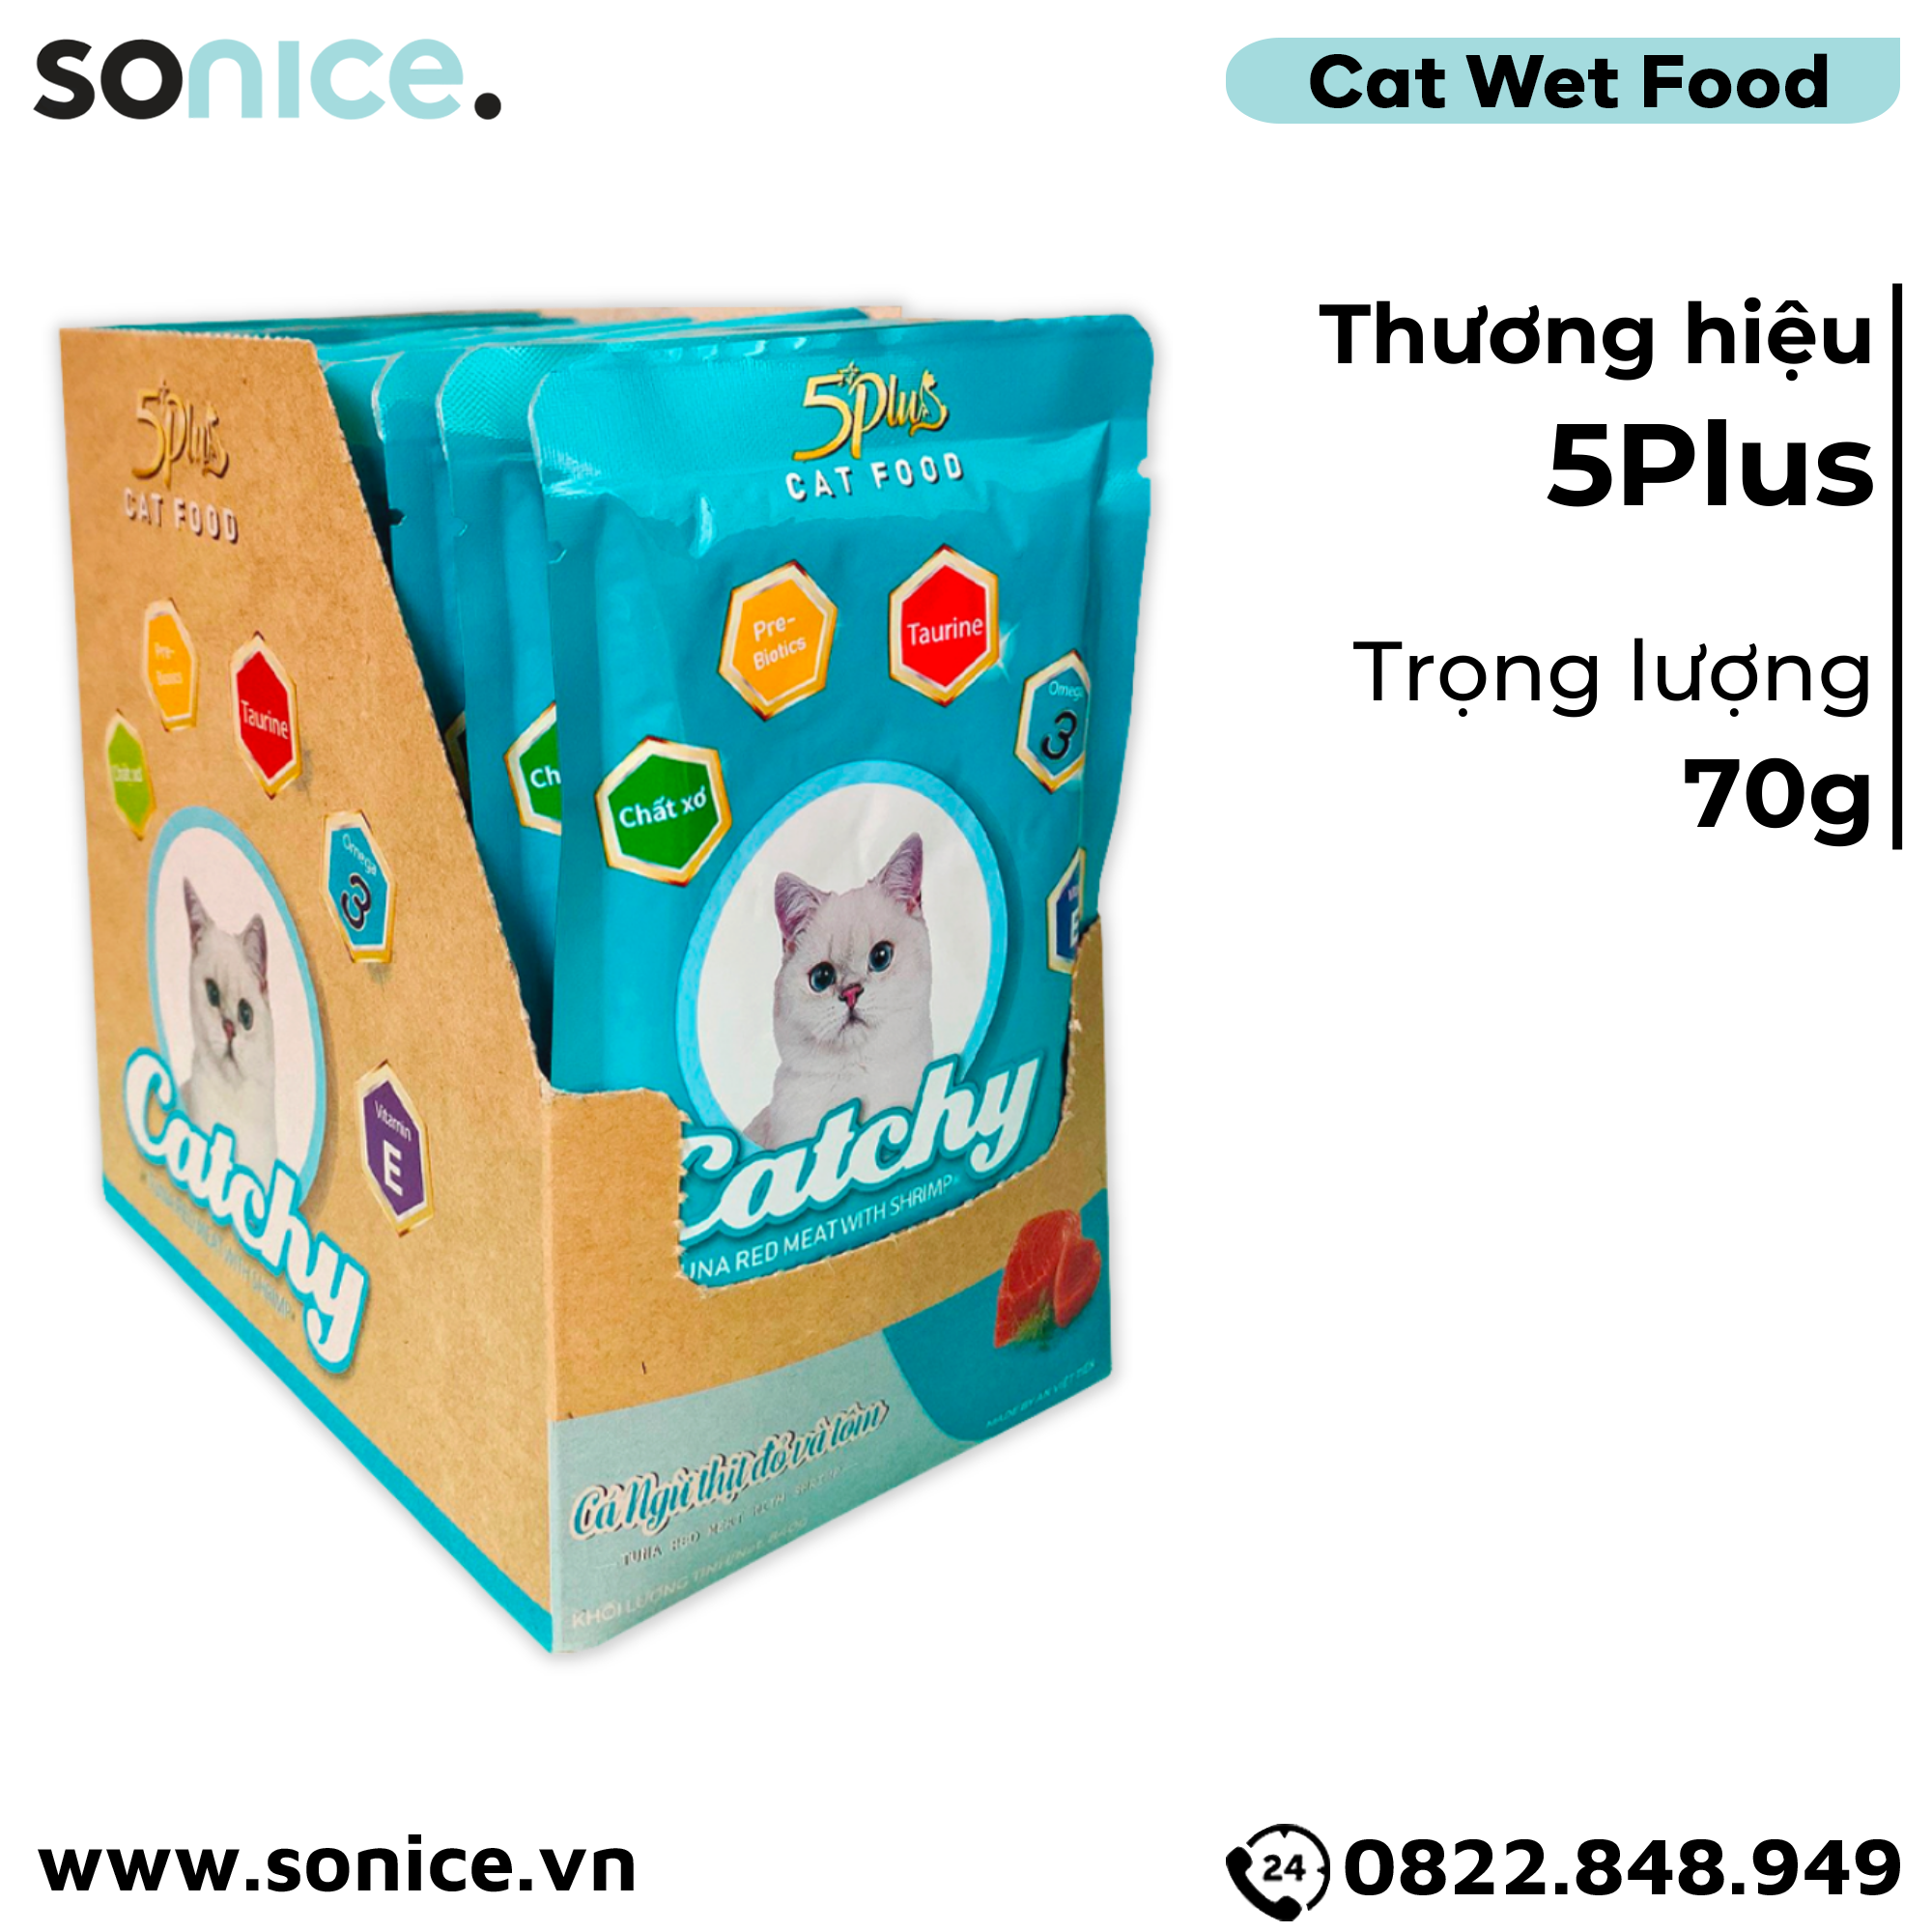  Pate mèo 5Plus Catchy Tuna Red Meat with Shrimp in Jelly 70g - Hộp 12 gói SONICE. 